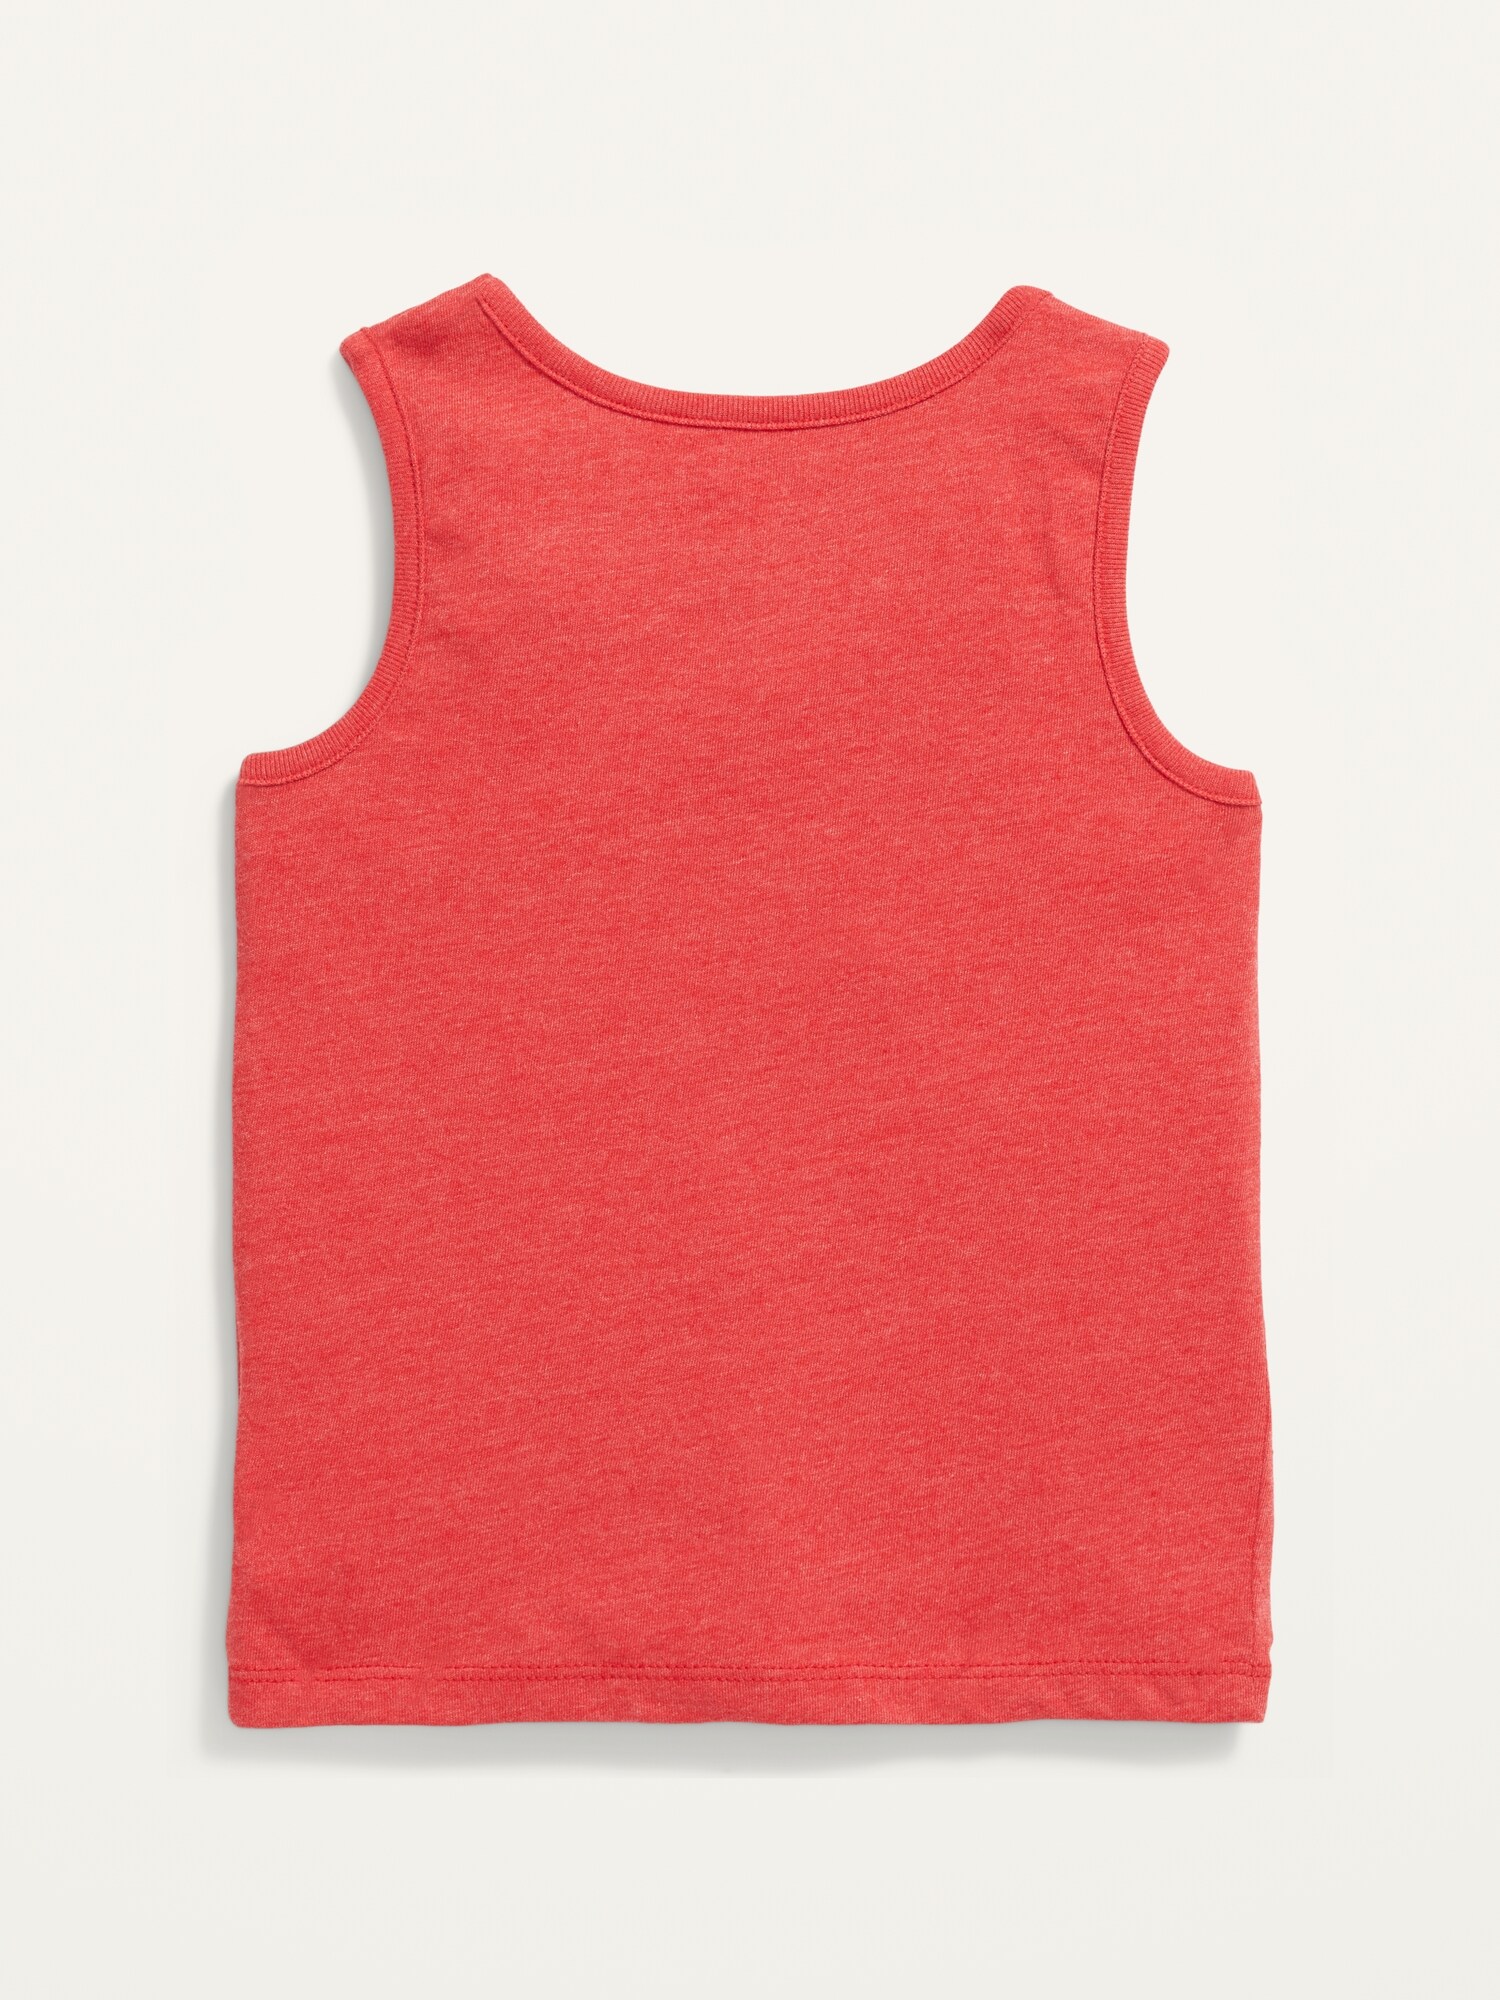 Unisex Graphic Tank Top for Toddler | Old Navy